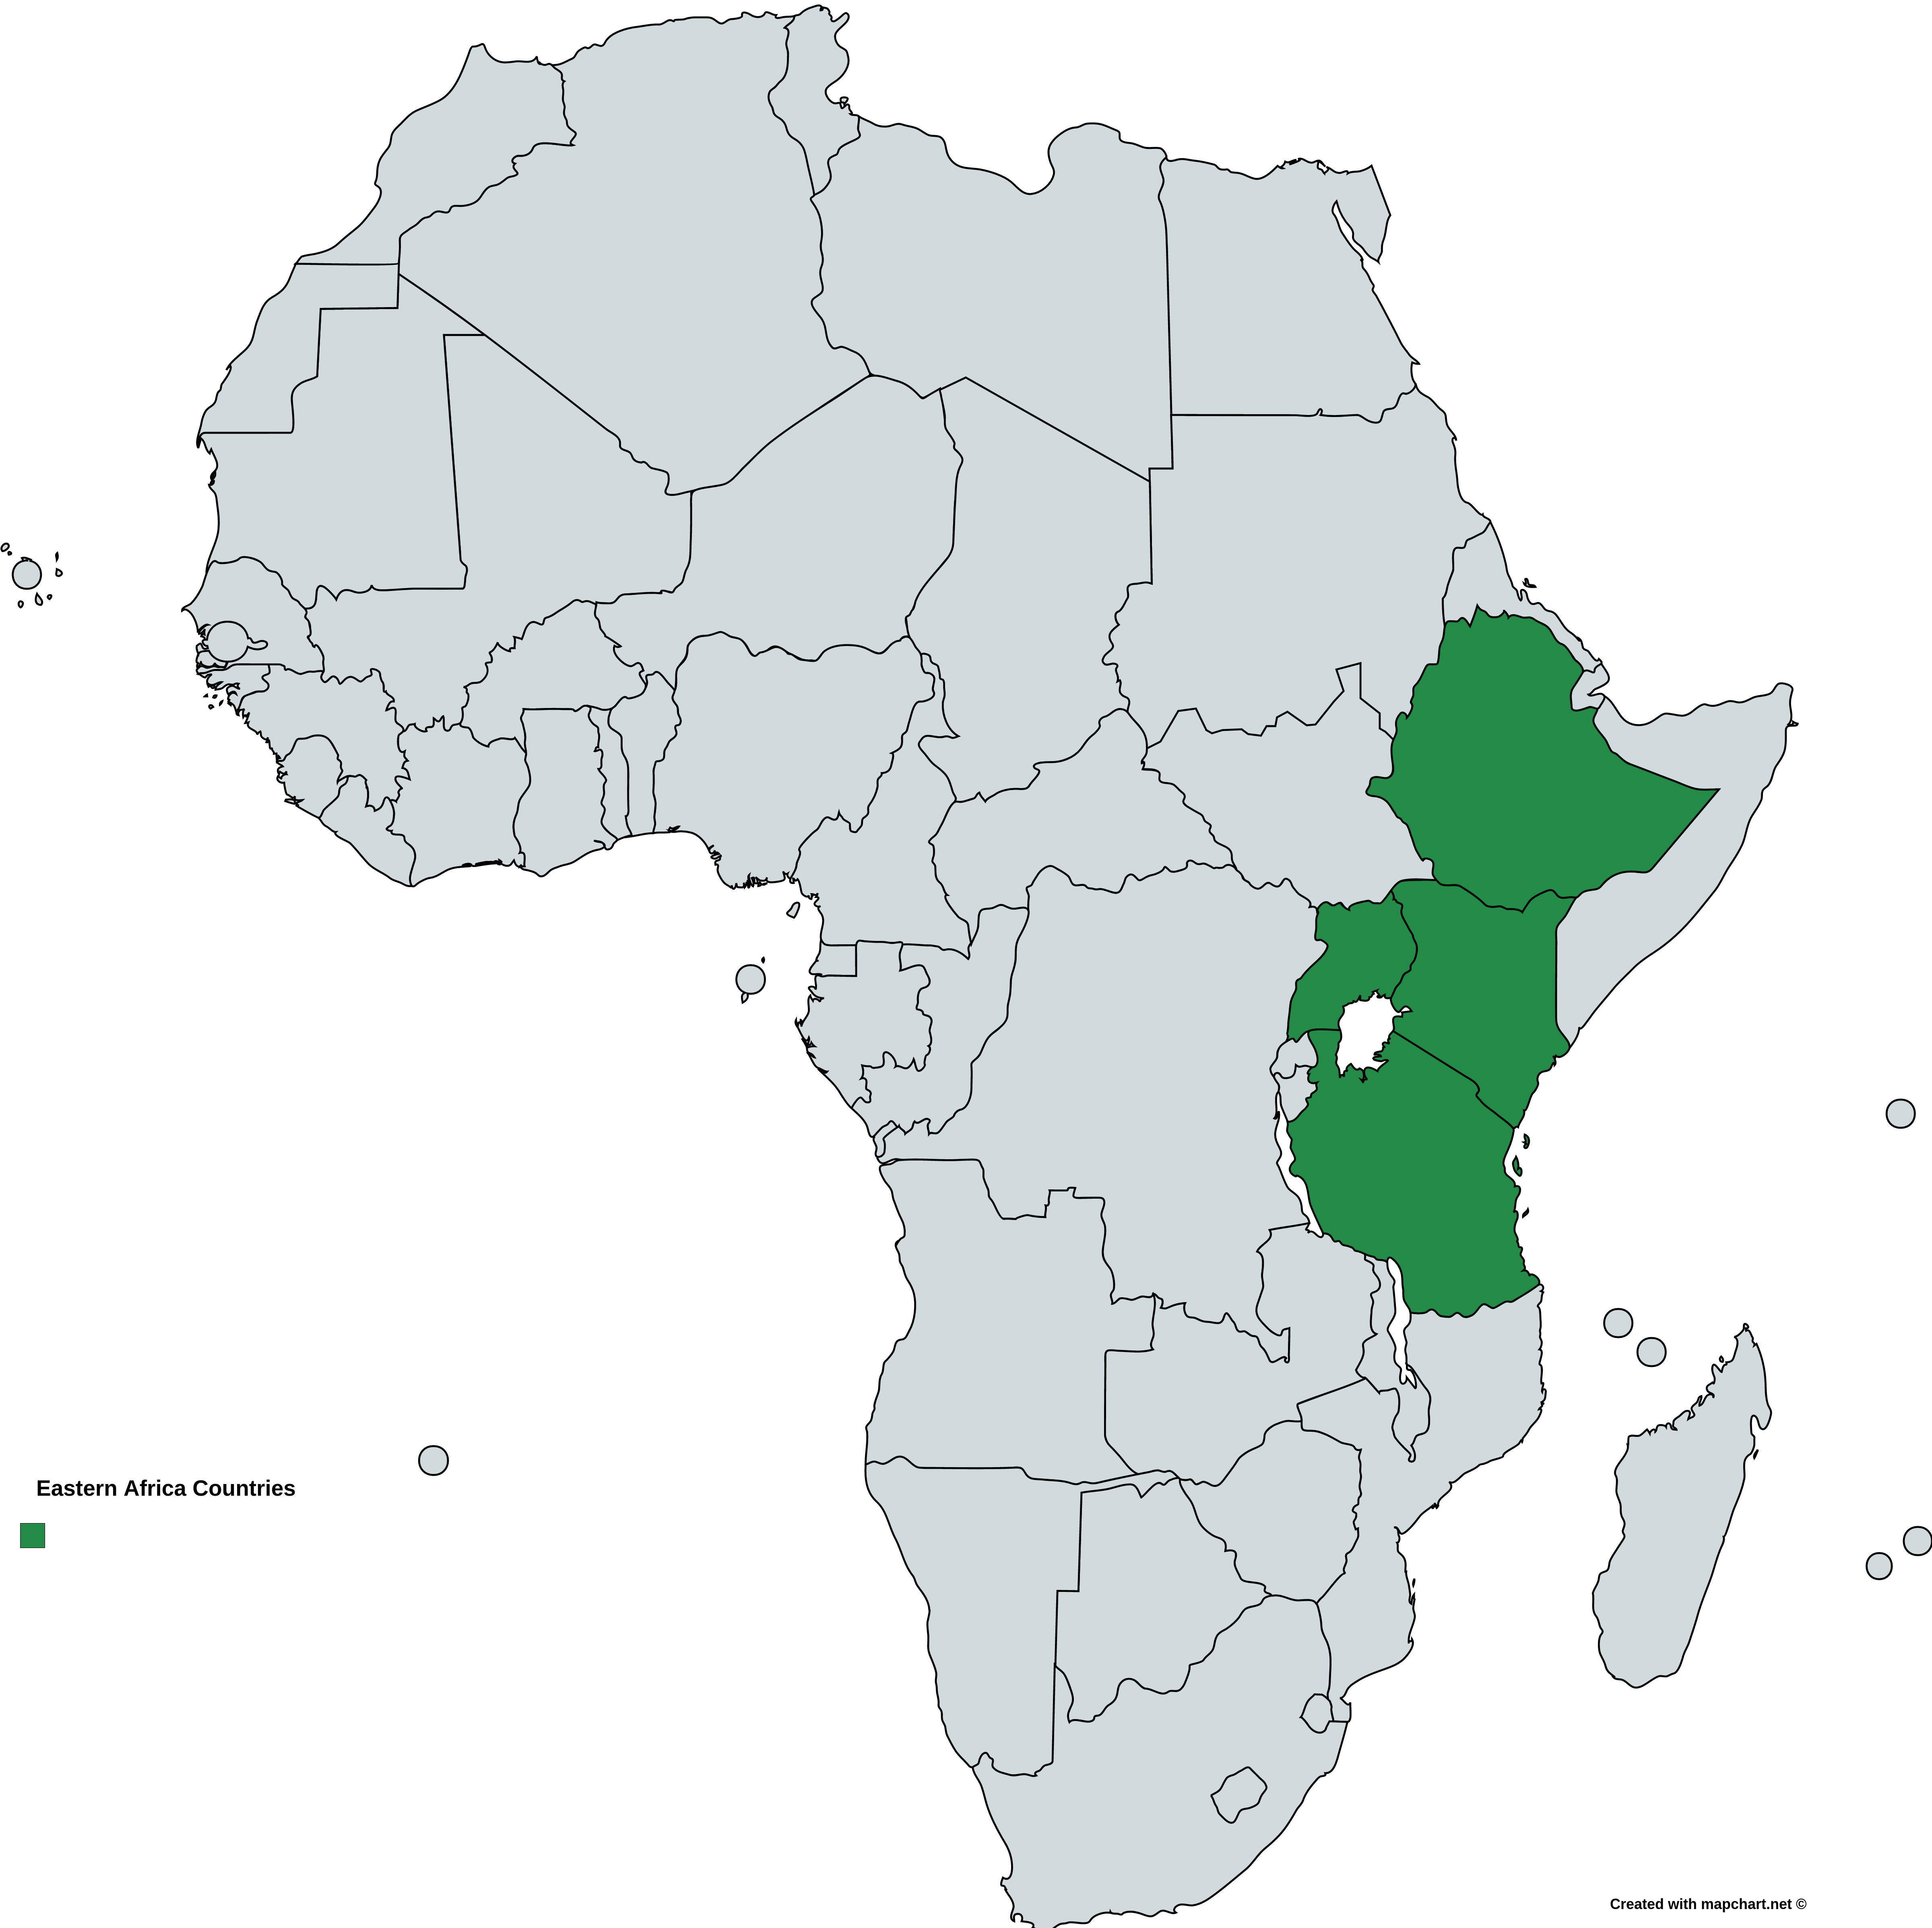 STMA locations in Eastern Africa